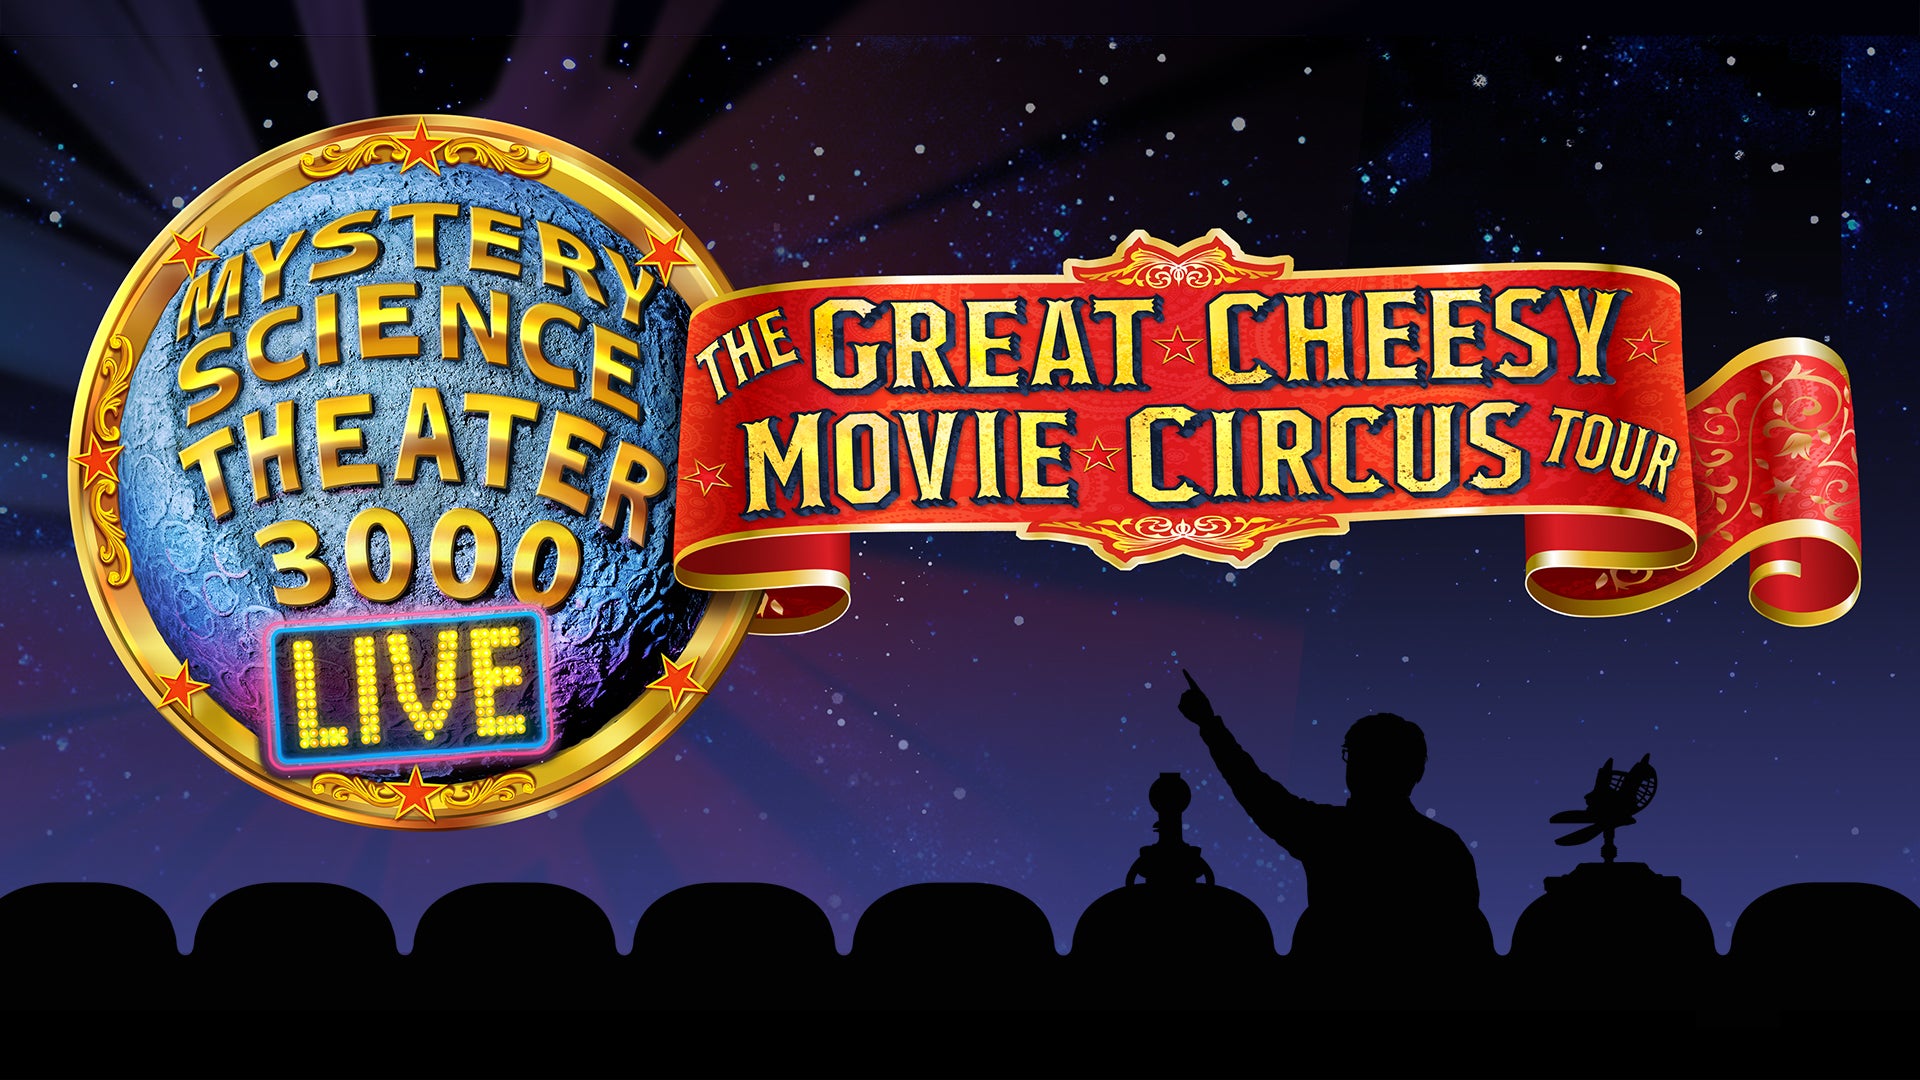 Mystery Science Theater 3000 Live: The Great Cheesy Movie Circus Tour